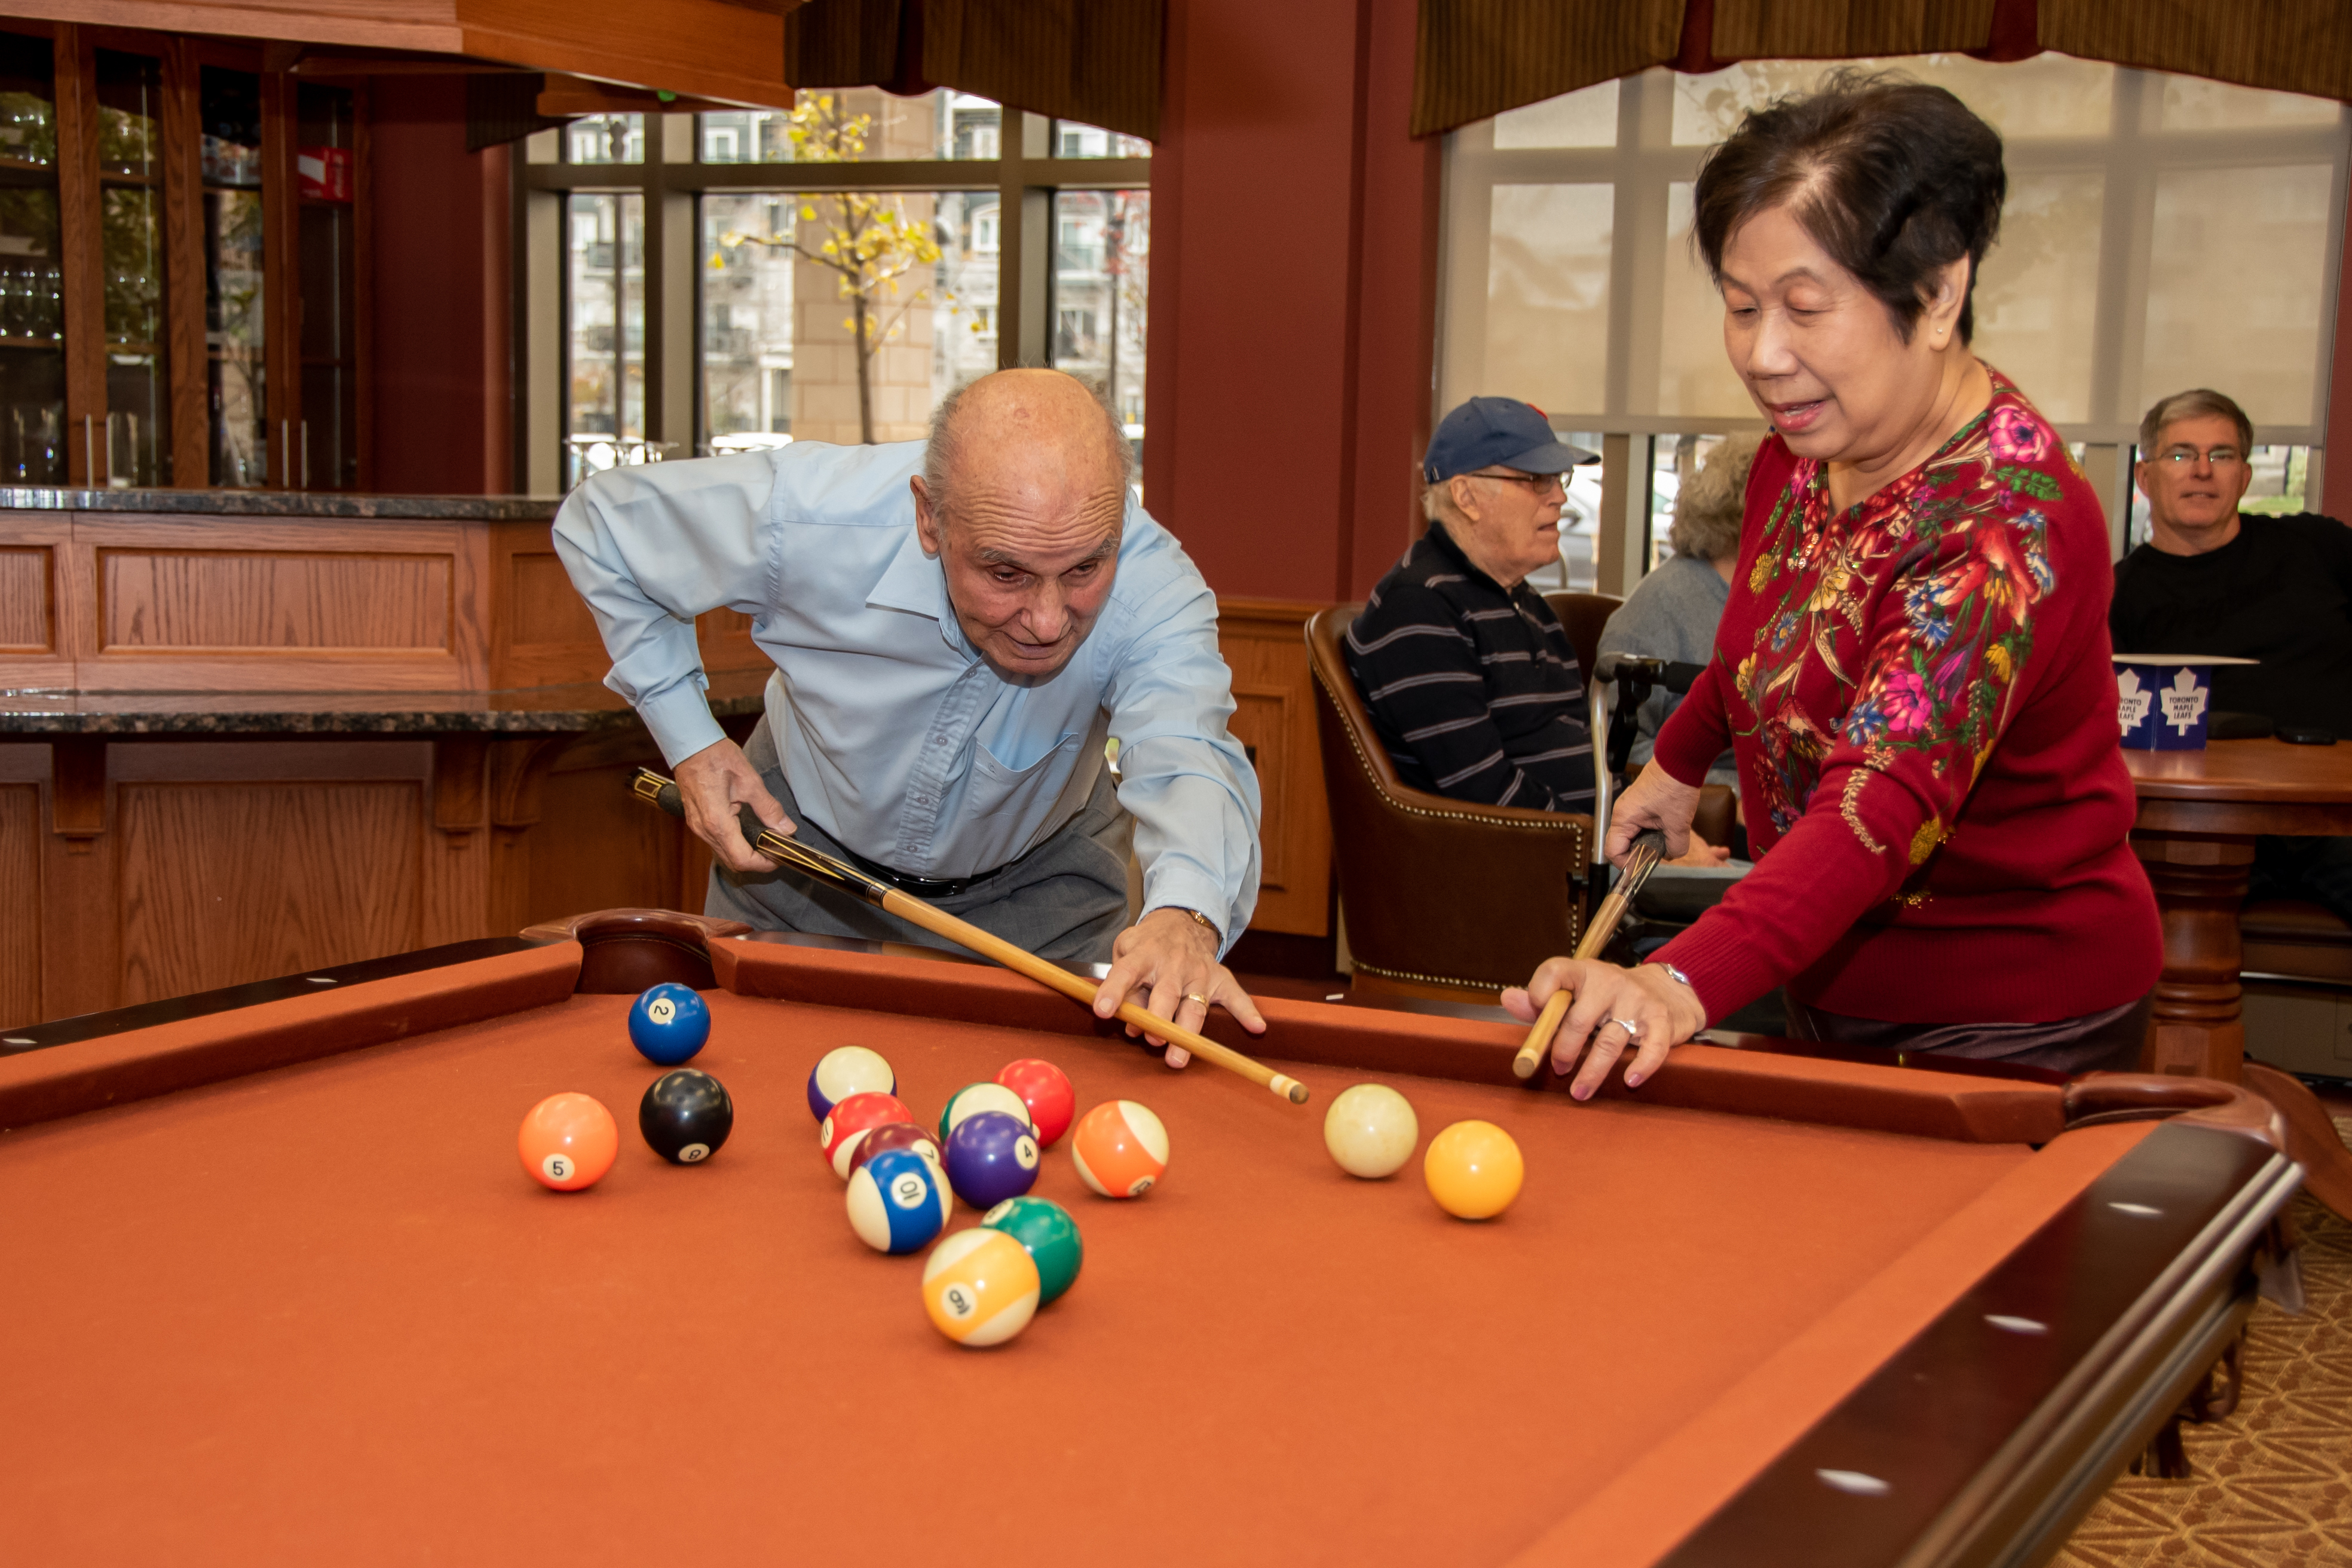 Residents playing pool in the Social Club